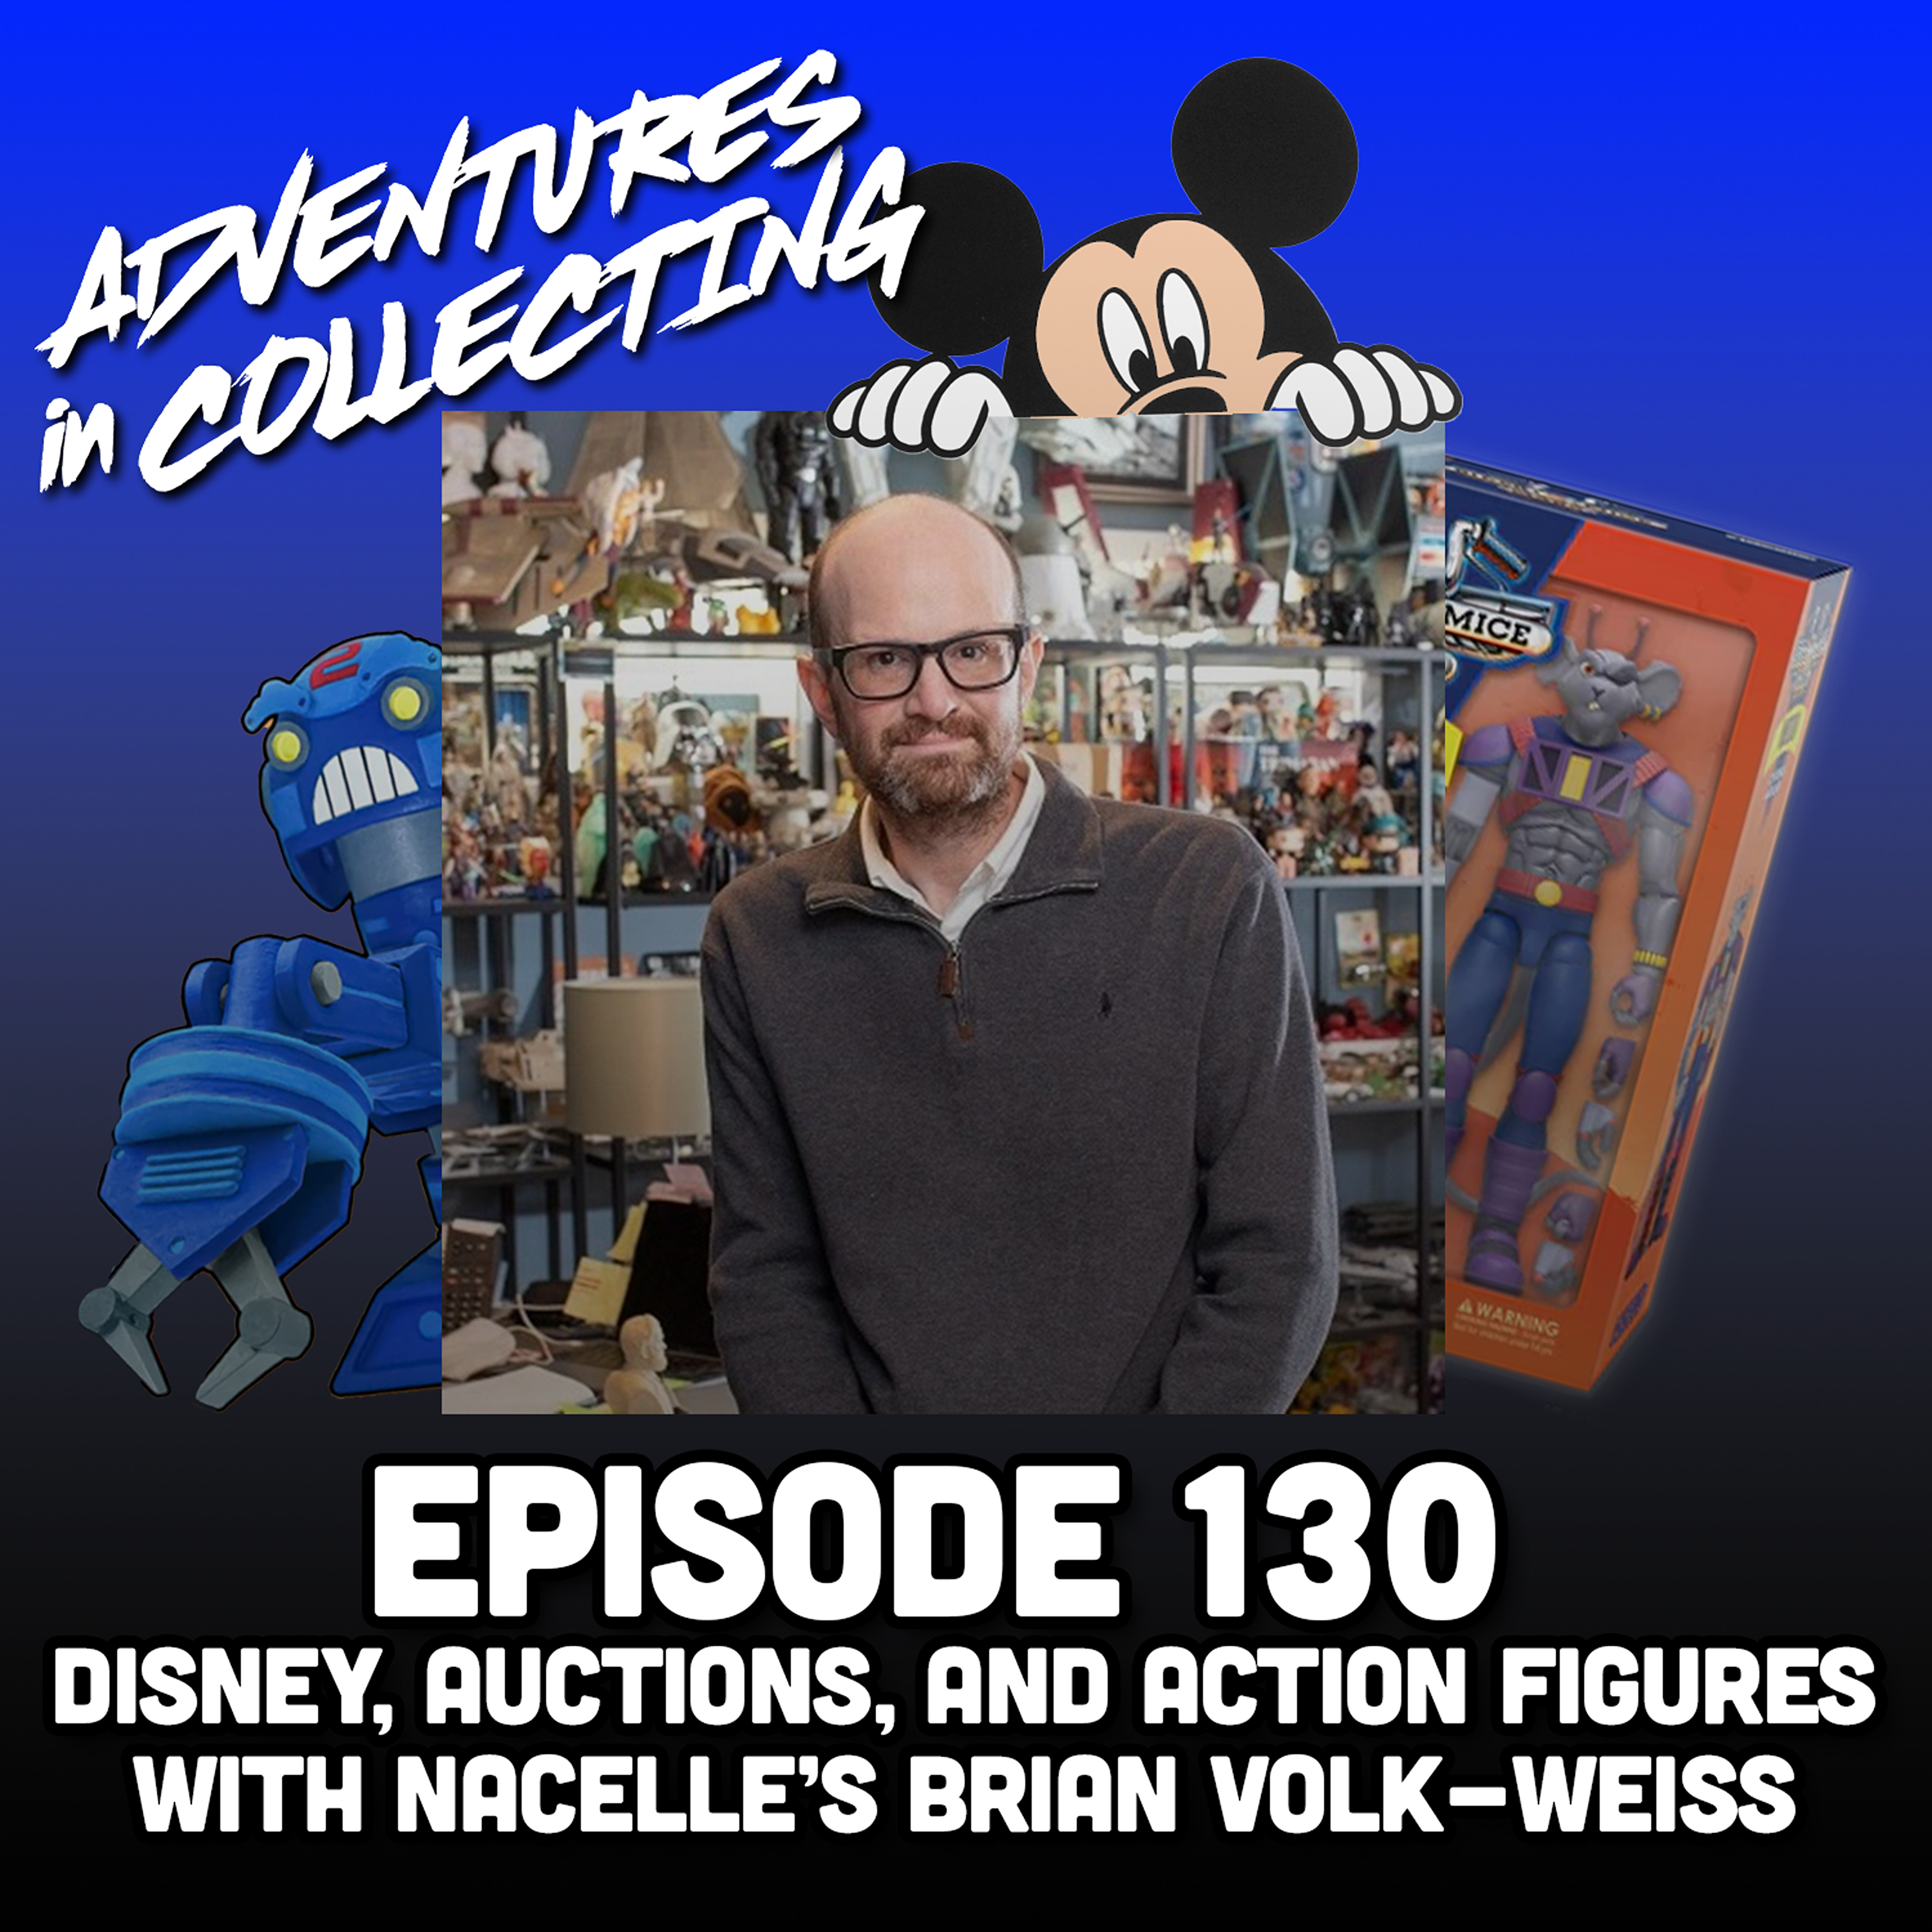 Disney, Auctions, and Action Figures with Nacelle’s Brian Volk-Weiss